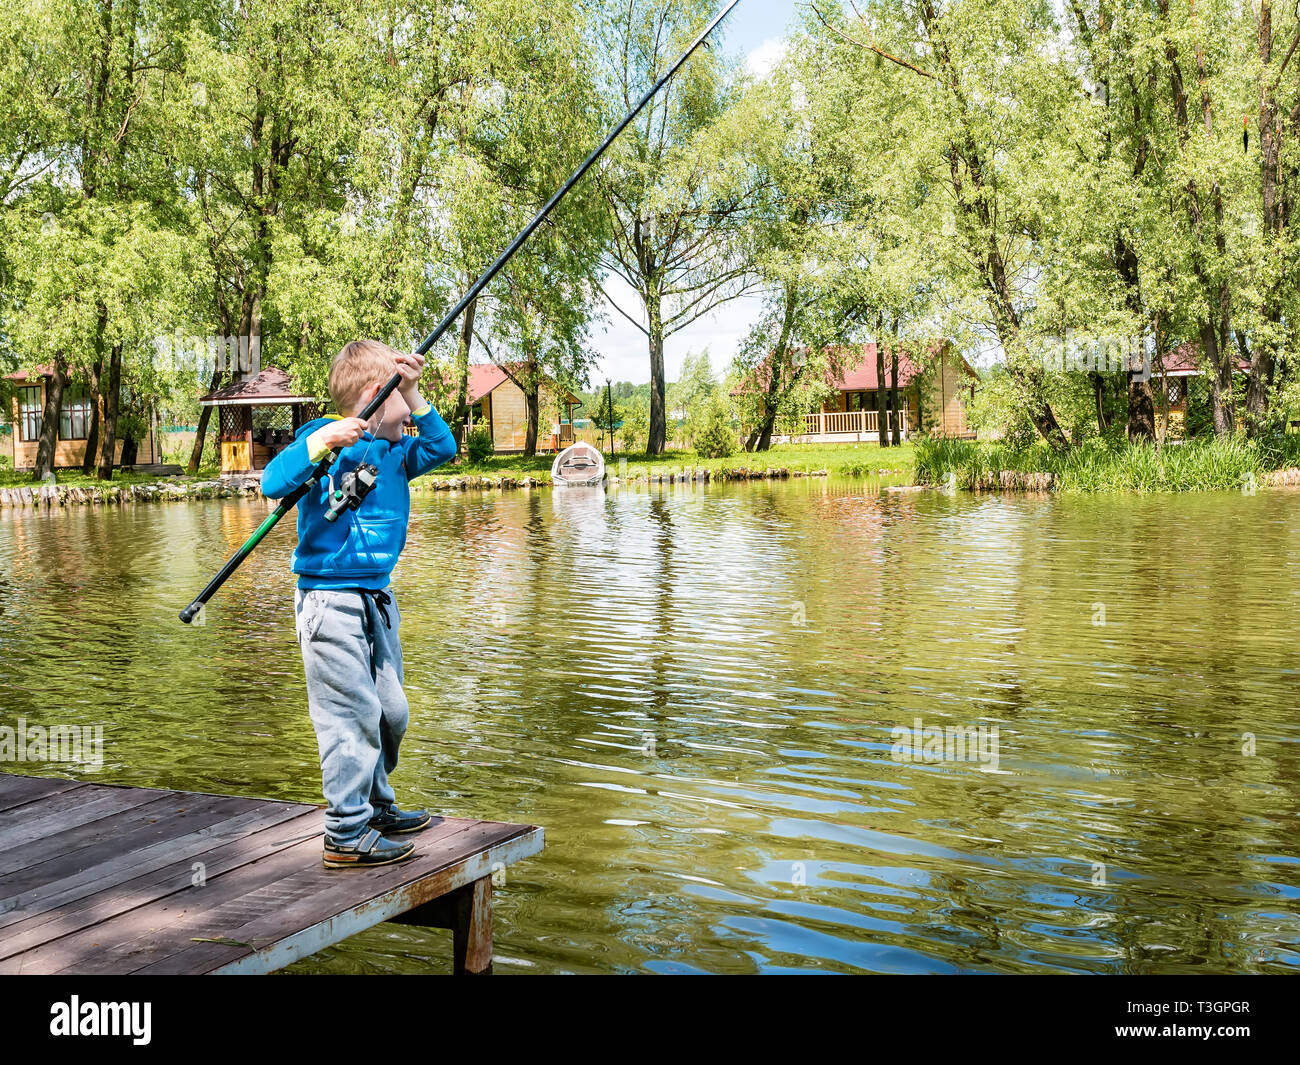 https://c8.alamy.com/comp/T3GPGR/boy-fishing-from-a-wooden-dock-on-a-lake-or-pond-pier-in-a-sunny-summer-day-back-view-of-a-little-5-year-old-unrecognizable-boy-playing-with-fishing-T3GPGR.jpg